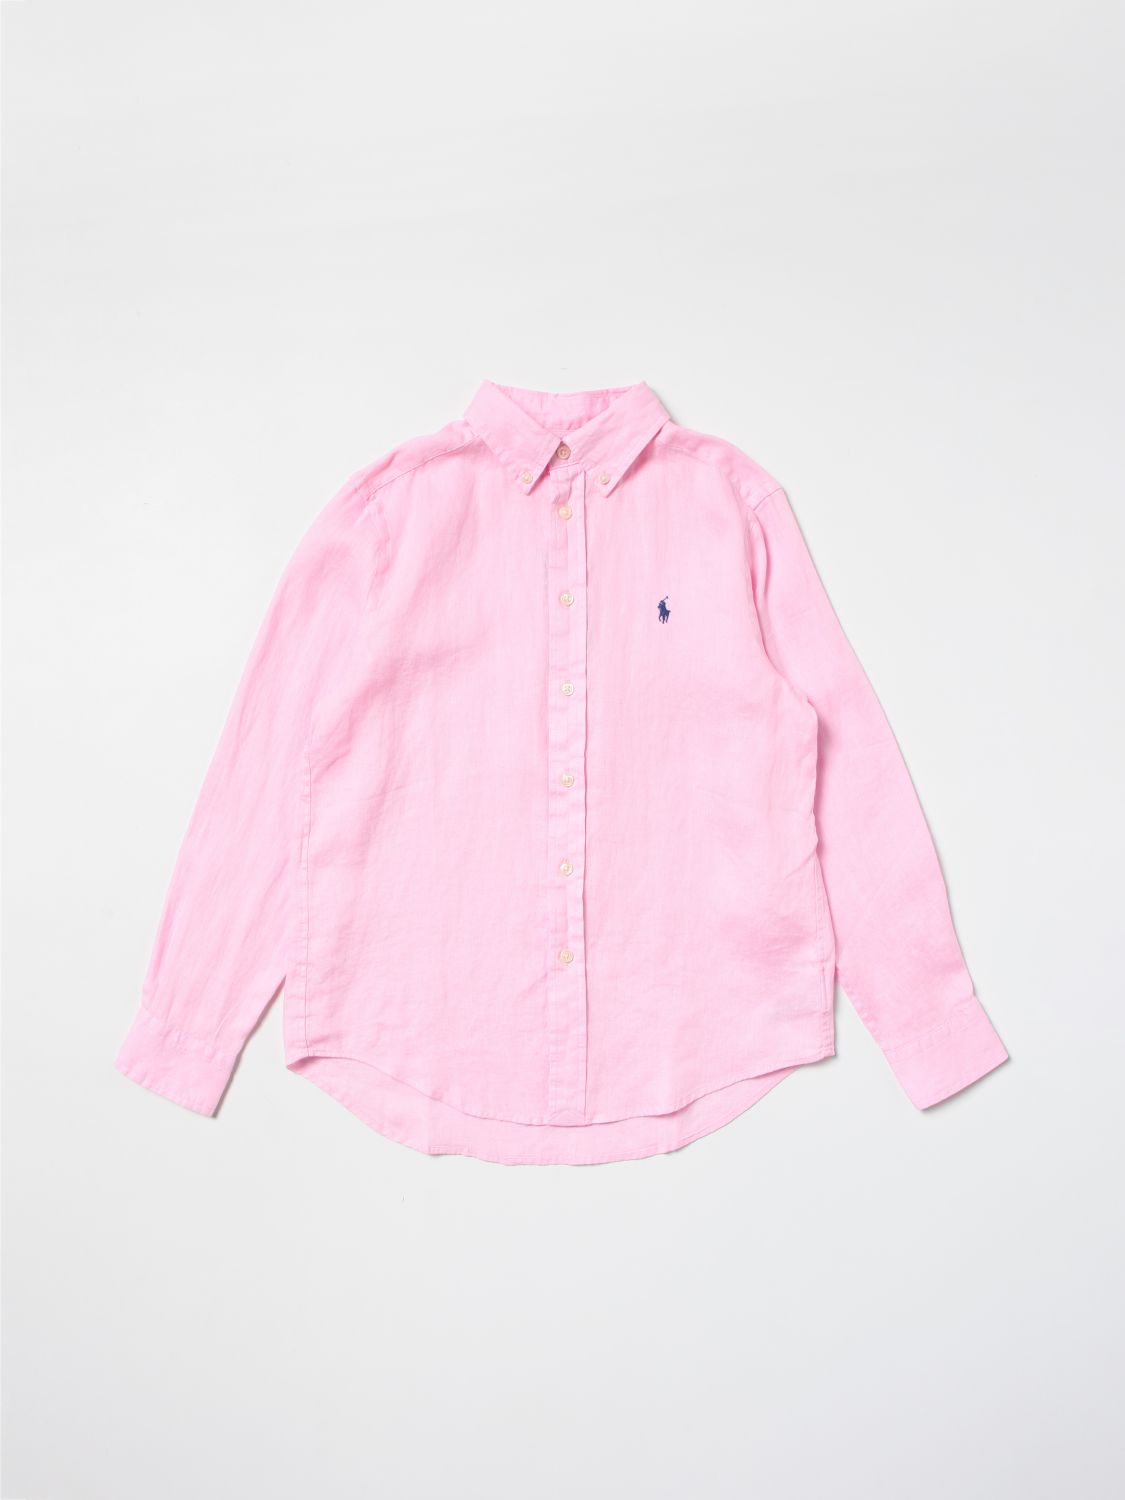 photography Ant Change clothes POLO RALPH LAUREN: Shirt kids - Baby Pink | Shirt Polo Ralph Lauren  323865270 GIGLIO.COM